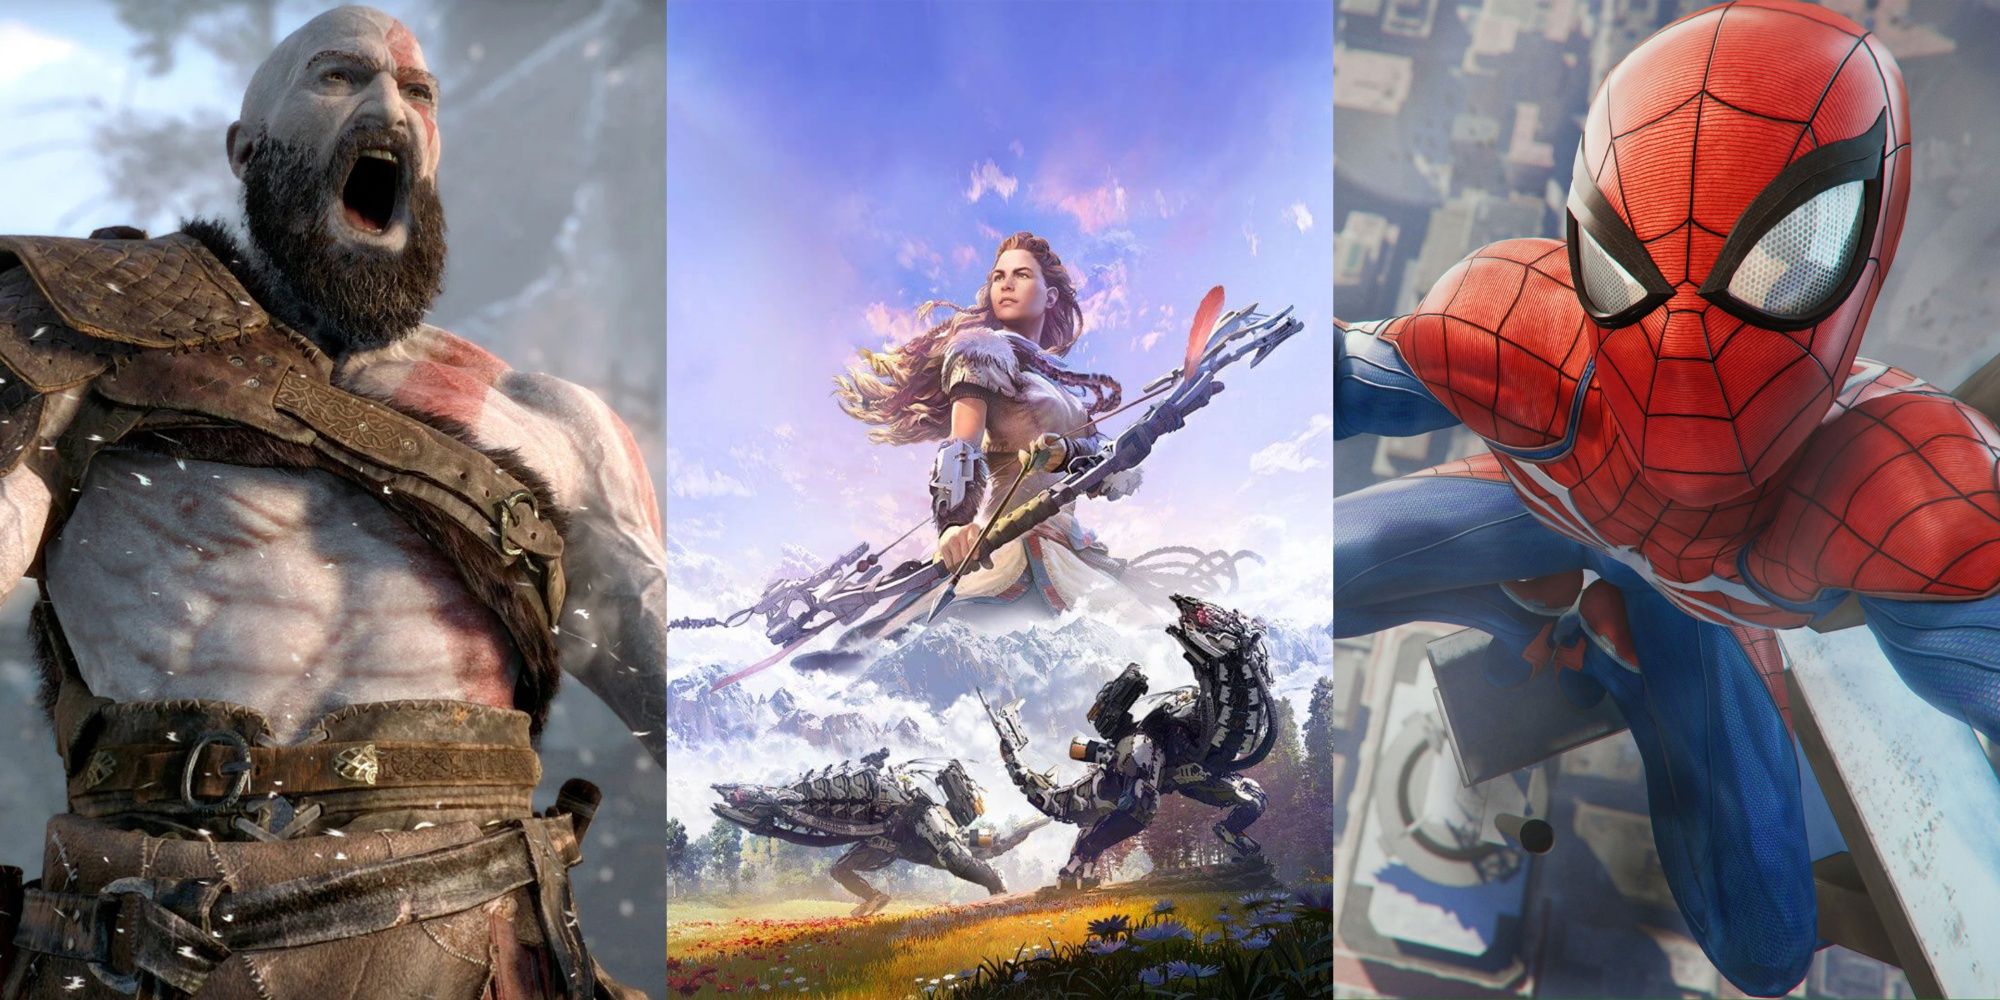 The Best PlayStation Protagonists: Kratos, Aloy, and Spider-Man